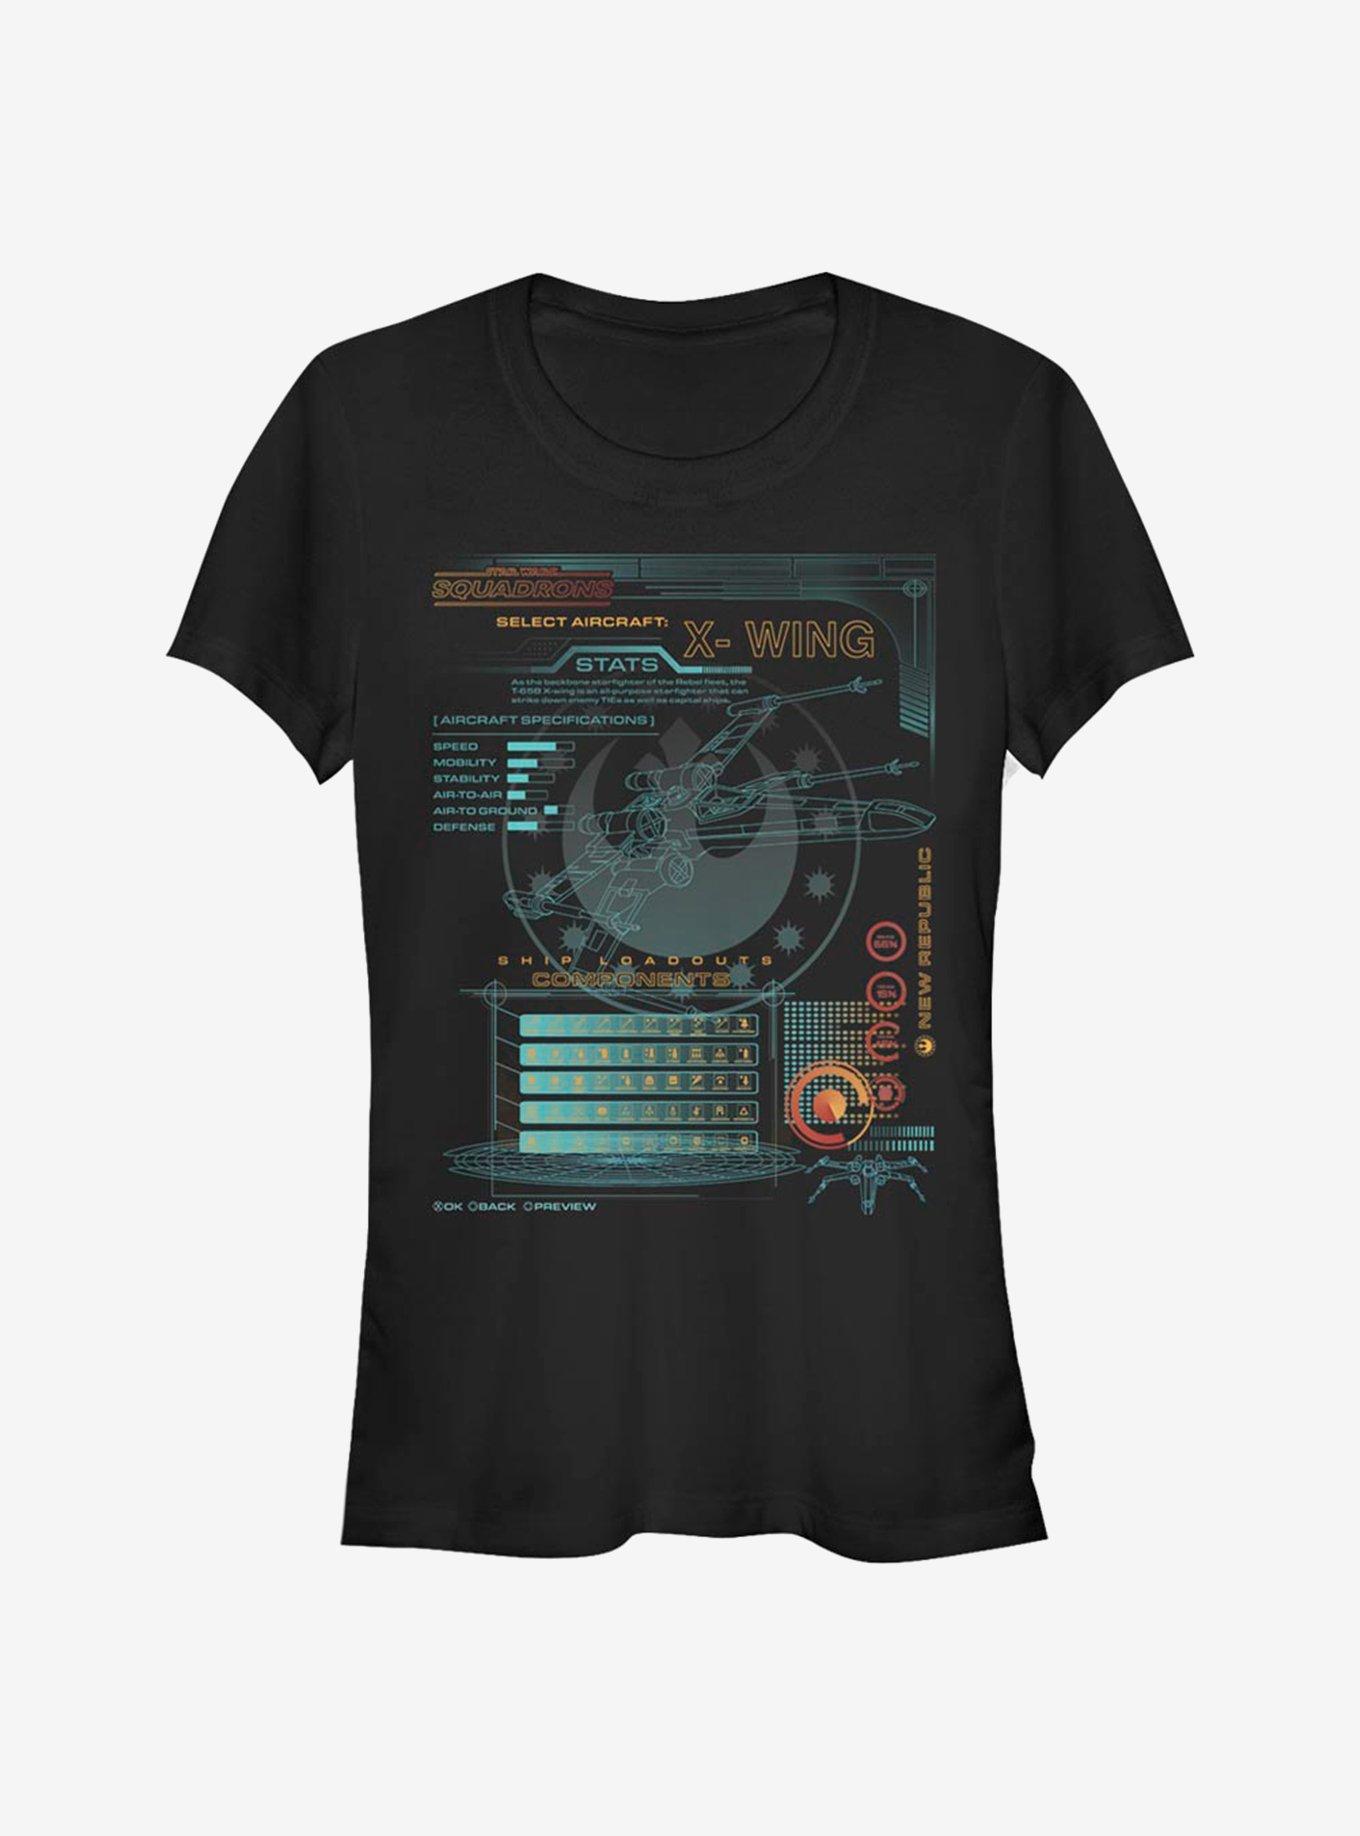 Star Wars X-Wing Game Components Girls T-Shirt, BLACK, hi-res